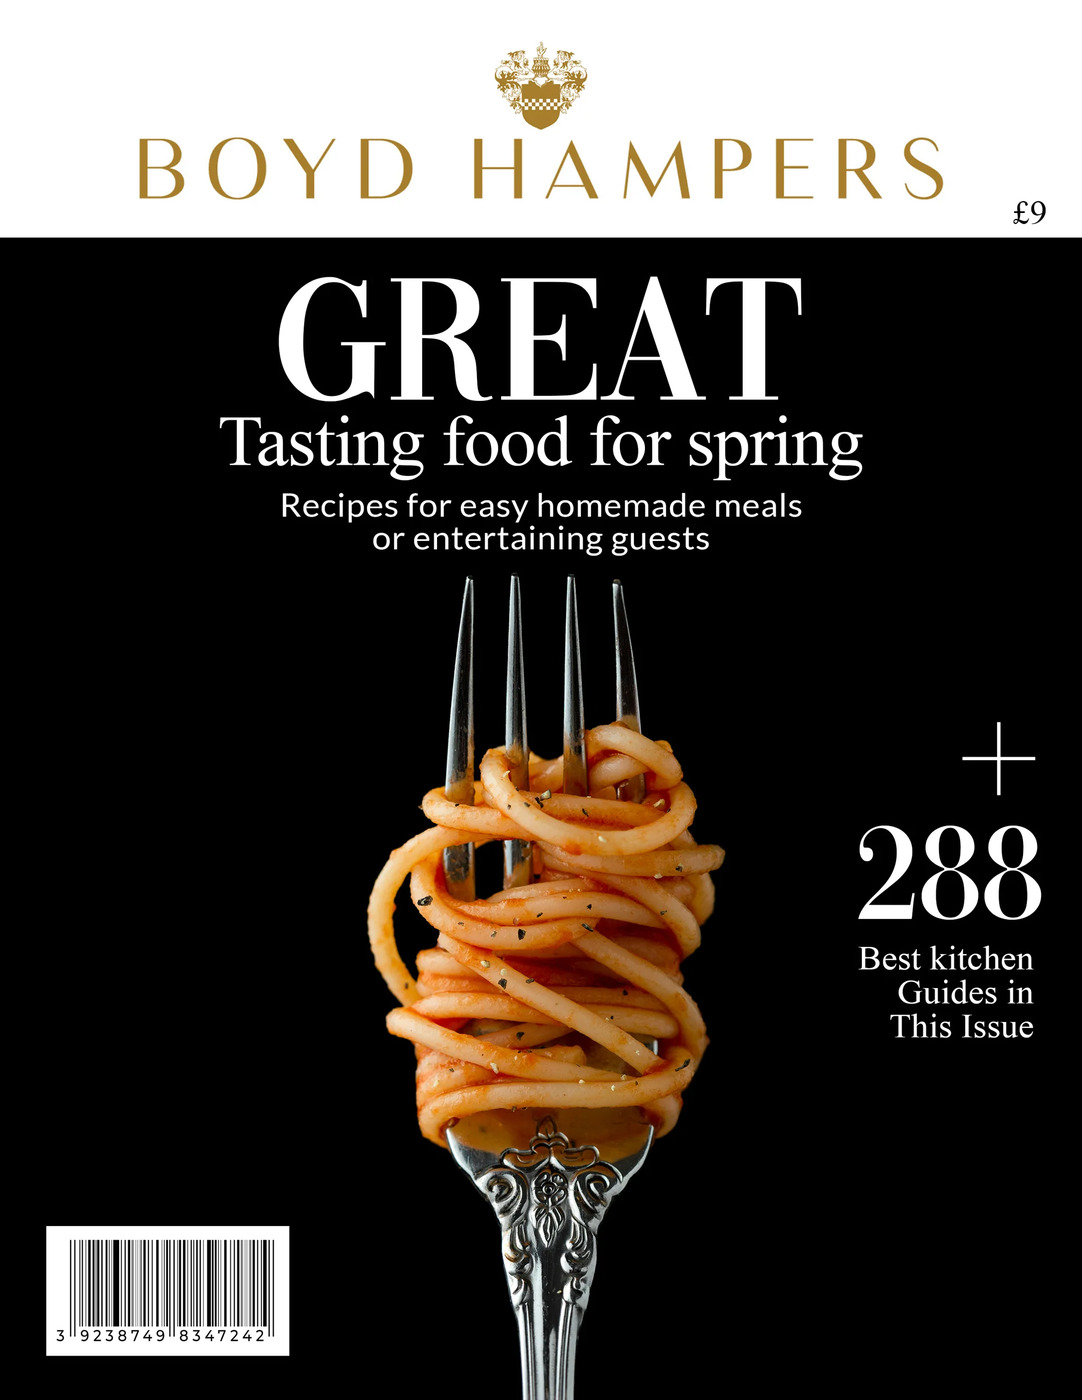 Boyd Hampers was founded in February 2001 and soon became one of the UK’s fastest-growing online gift hamper retailers